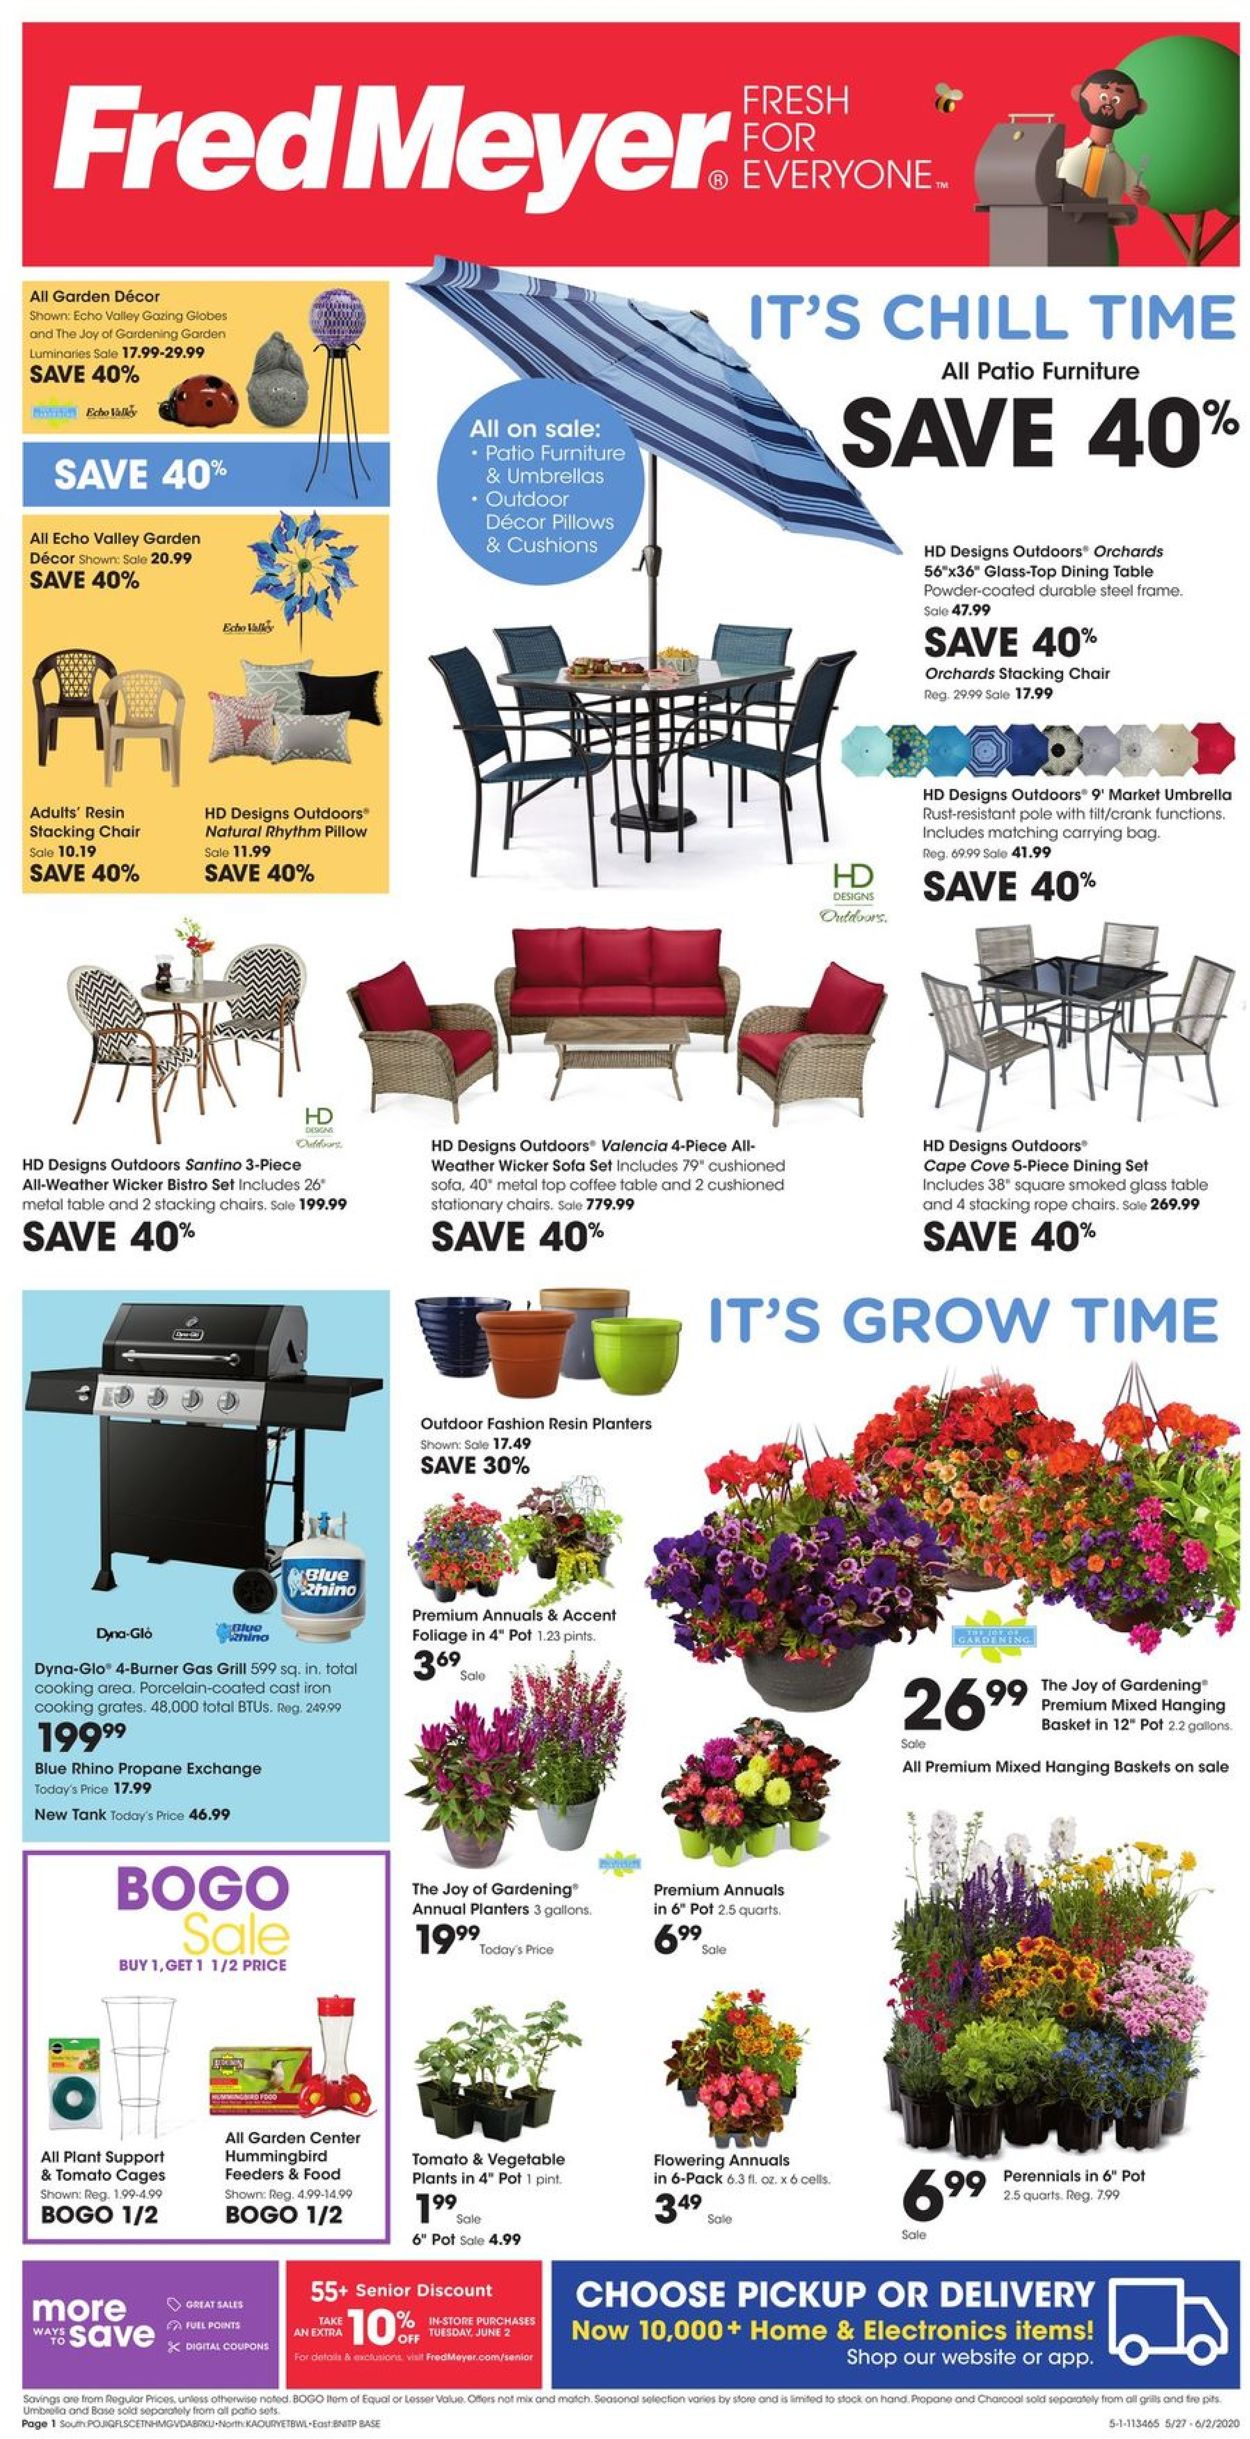 Fred Meyer Current Weekly Ad 0527 - 06022020 - Frequent-adscom